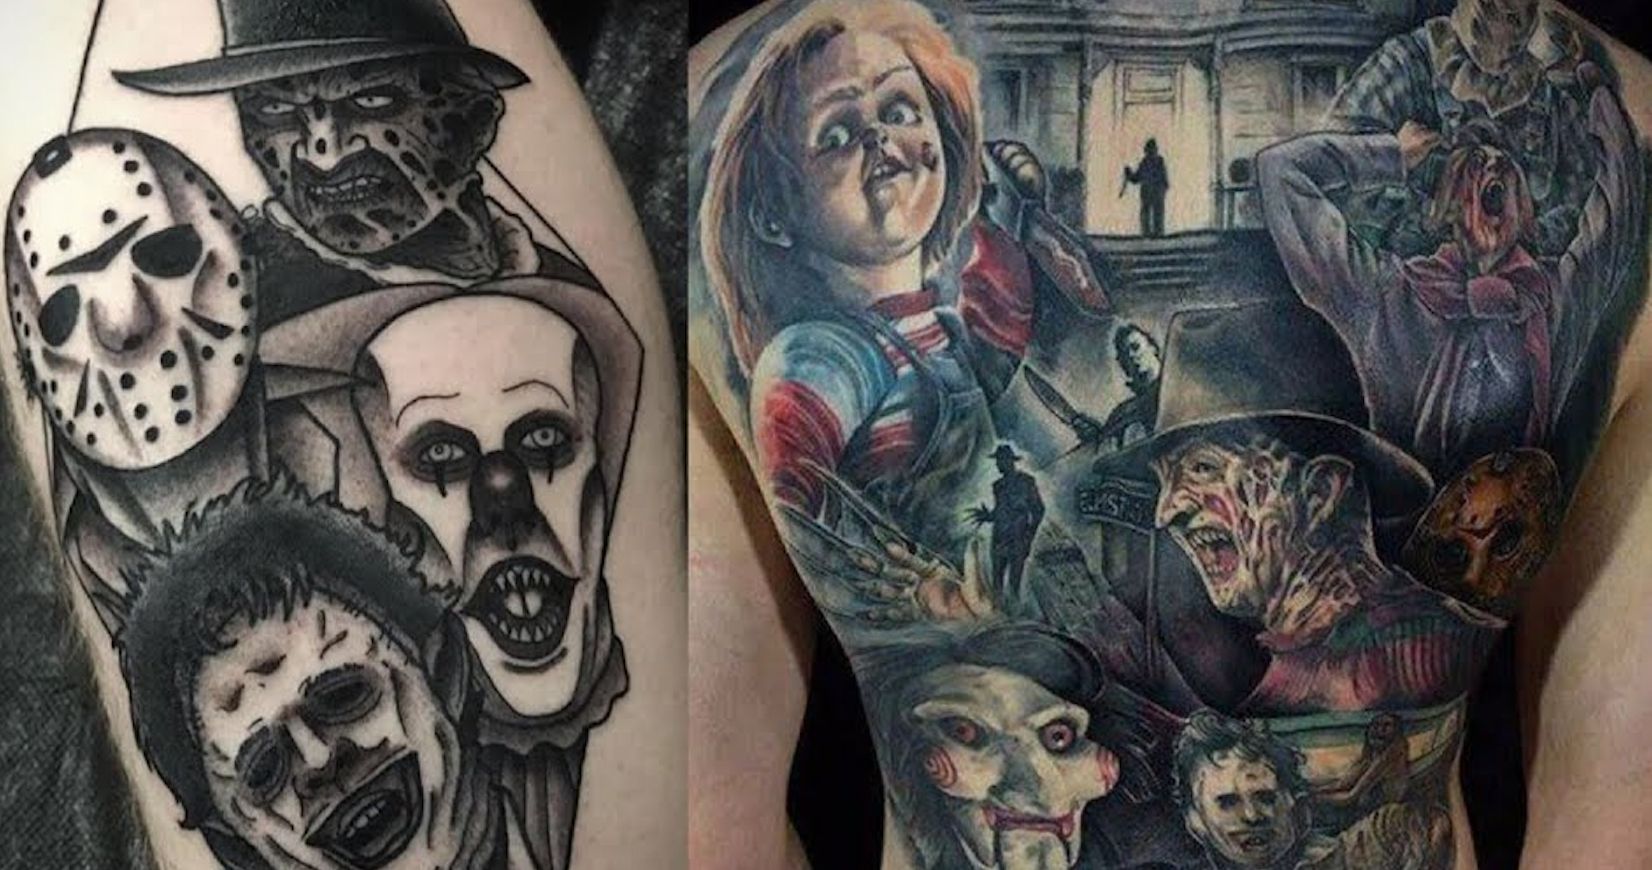 20 Horror Tattoos To Get You Into the Halloween Spirit [Gallery]